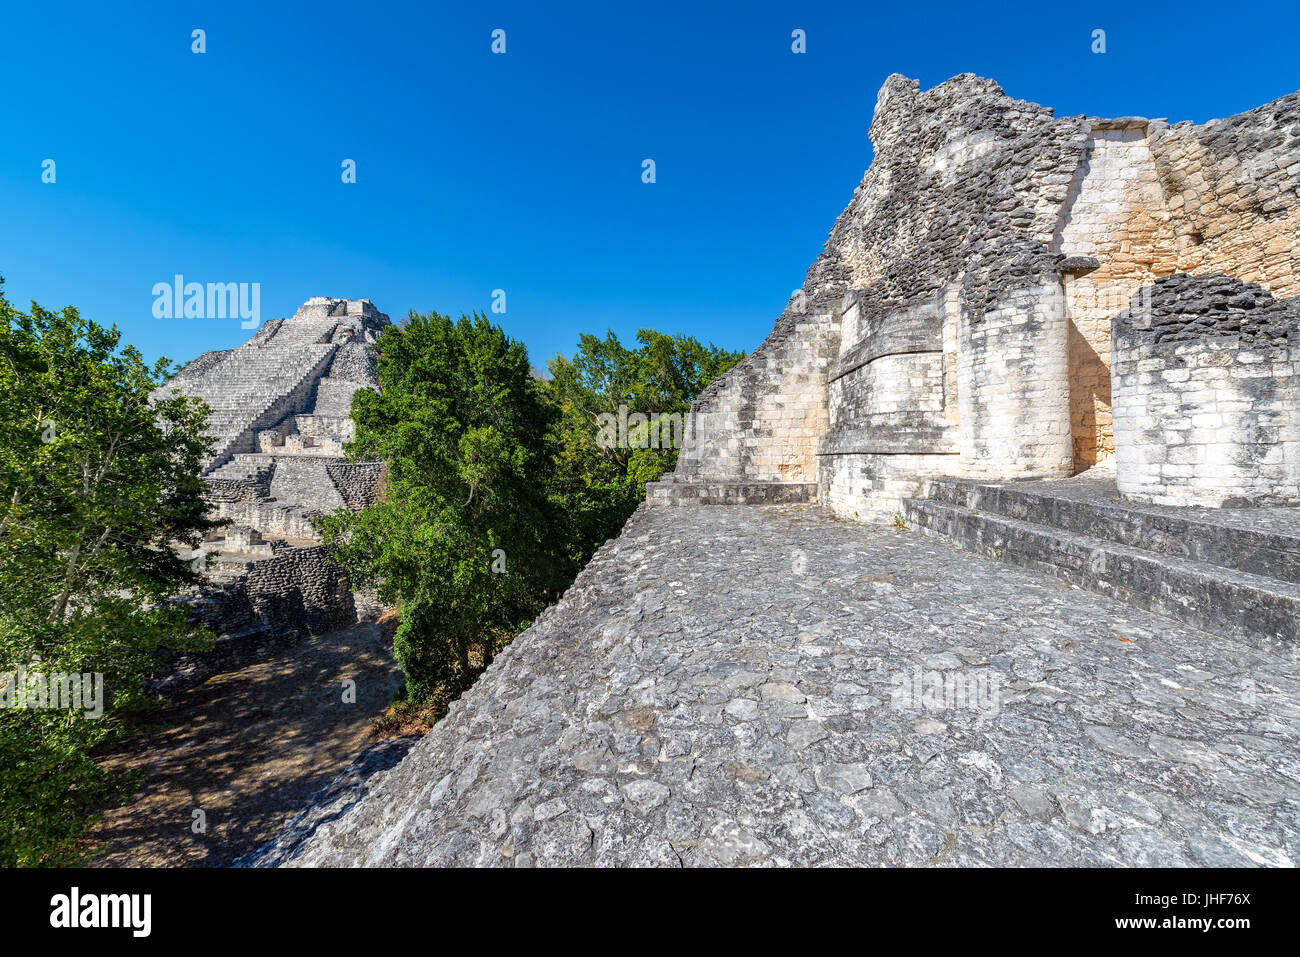 View of ruined Mayan pyramids in the ancient city of Becan, Mexico Stock Photo